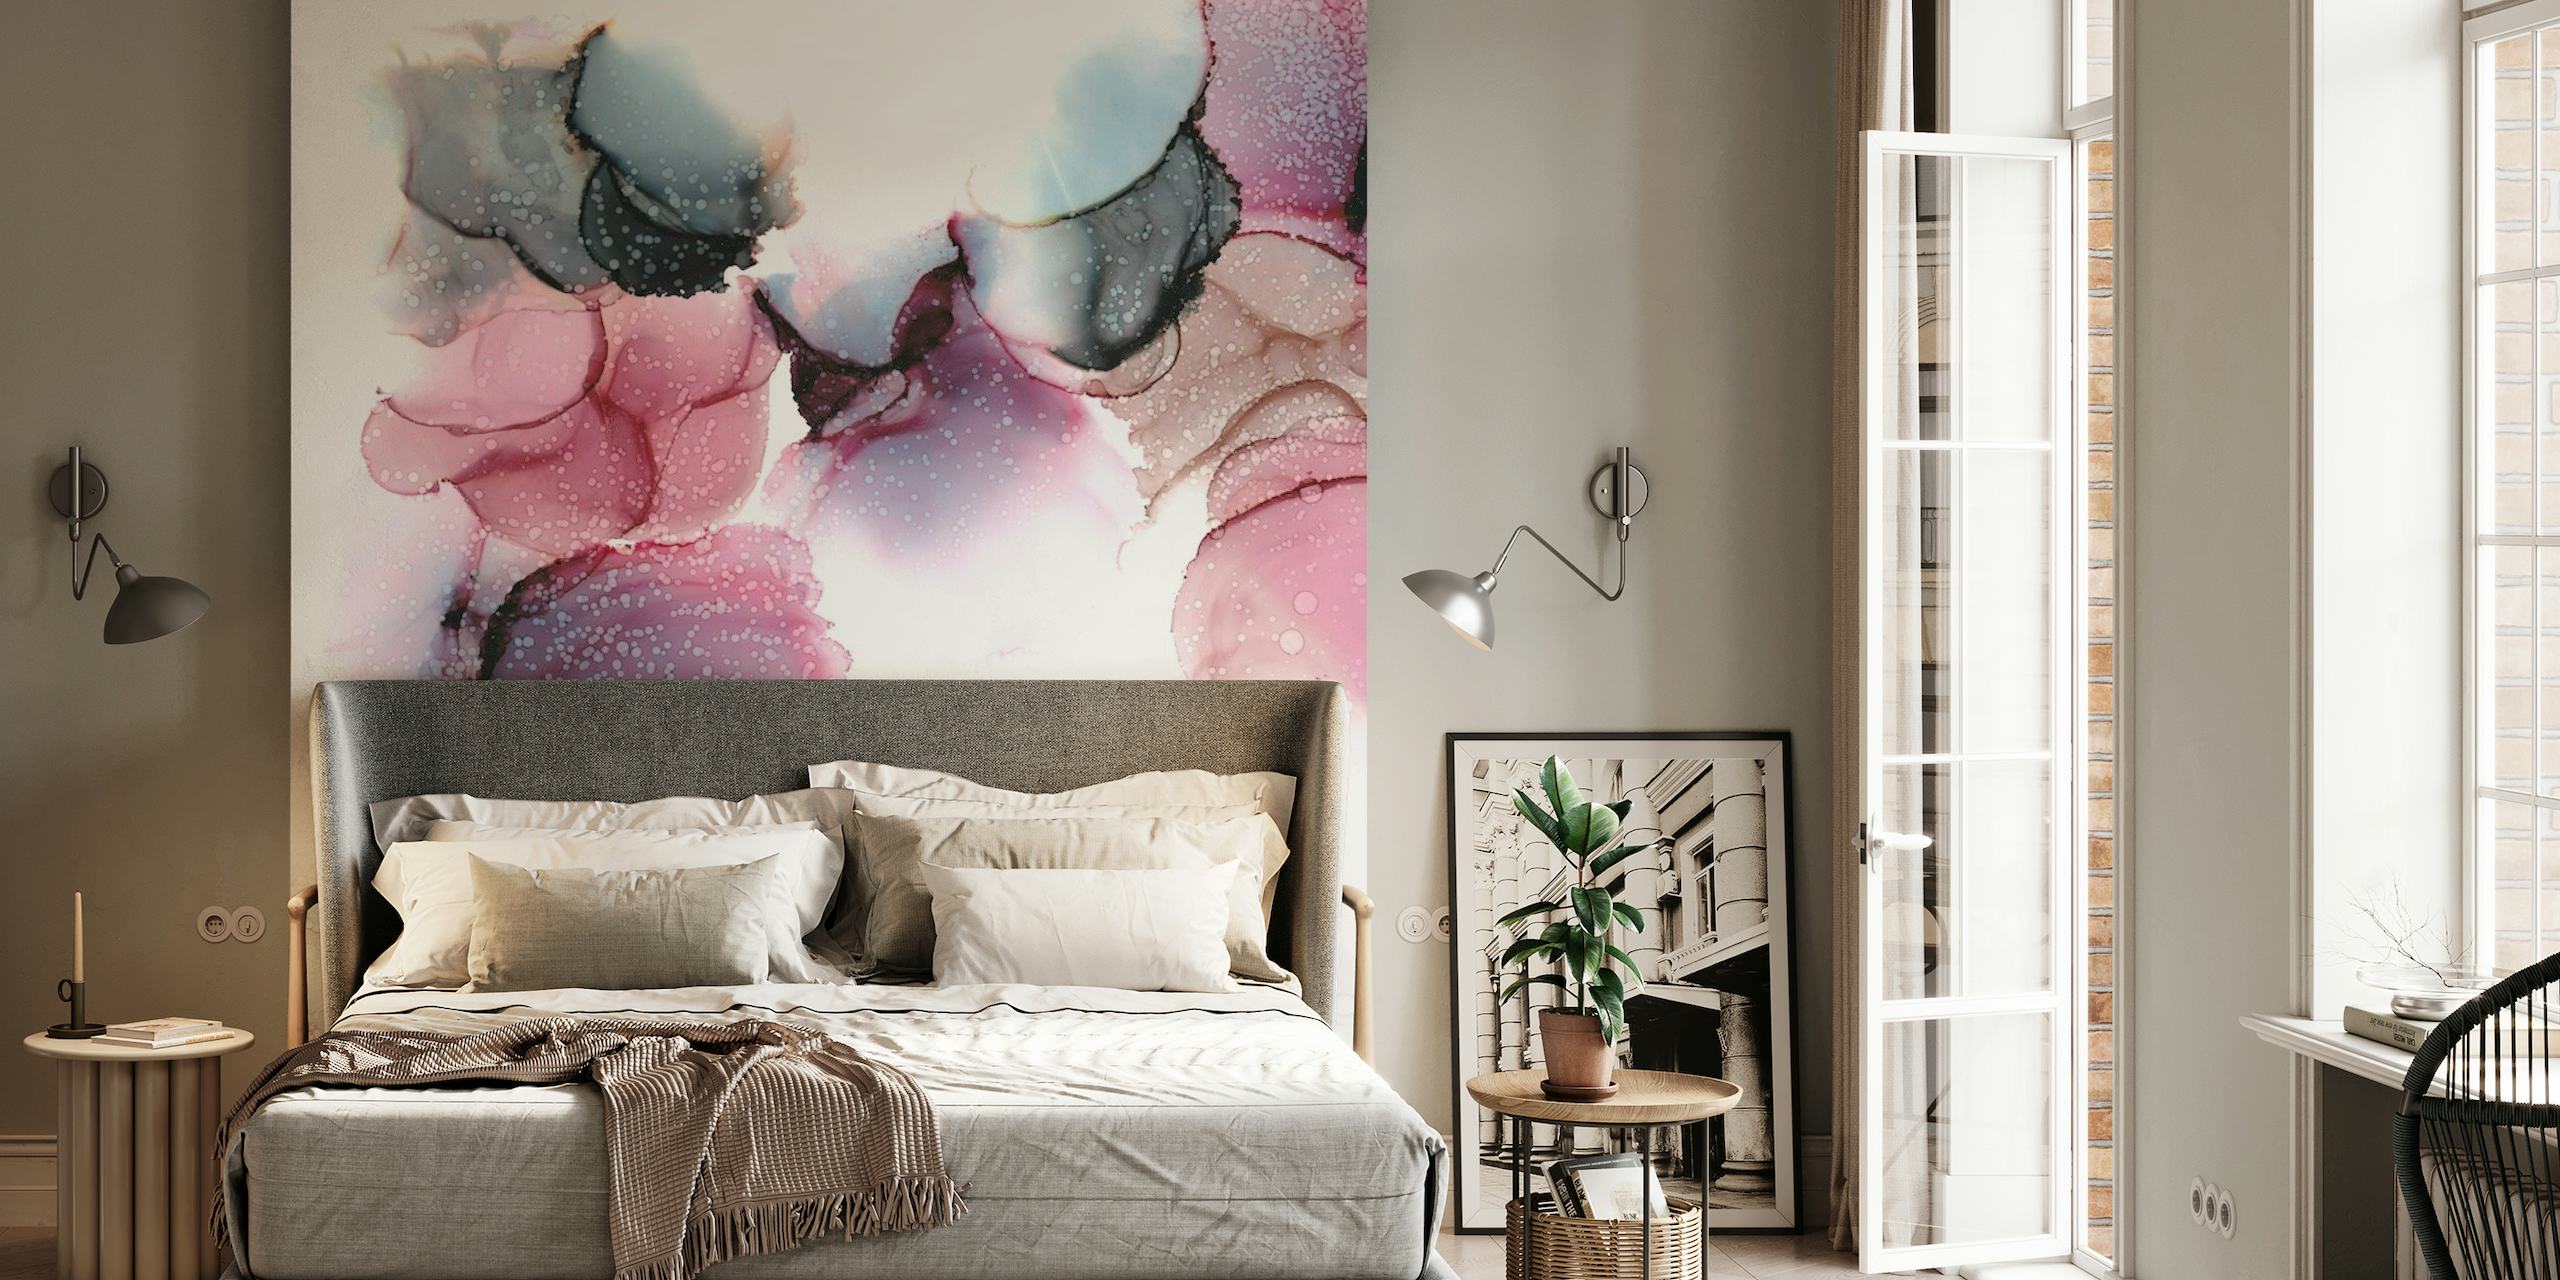 Abstract bubble tent wall mural with soft pink and gray watercolor blotches